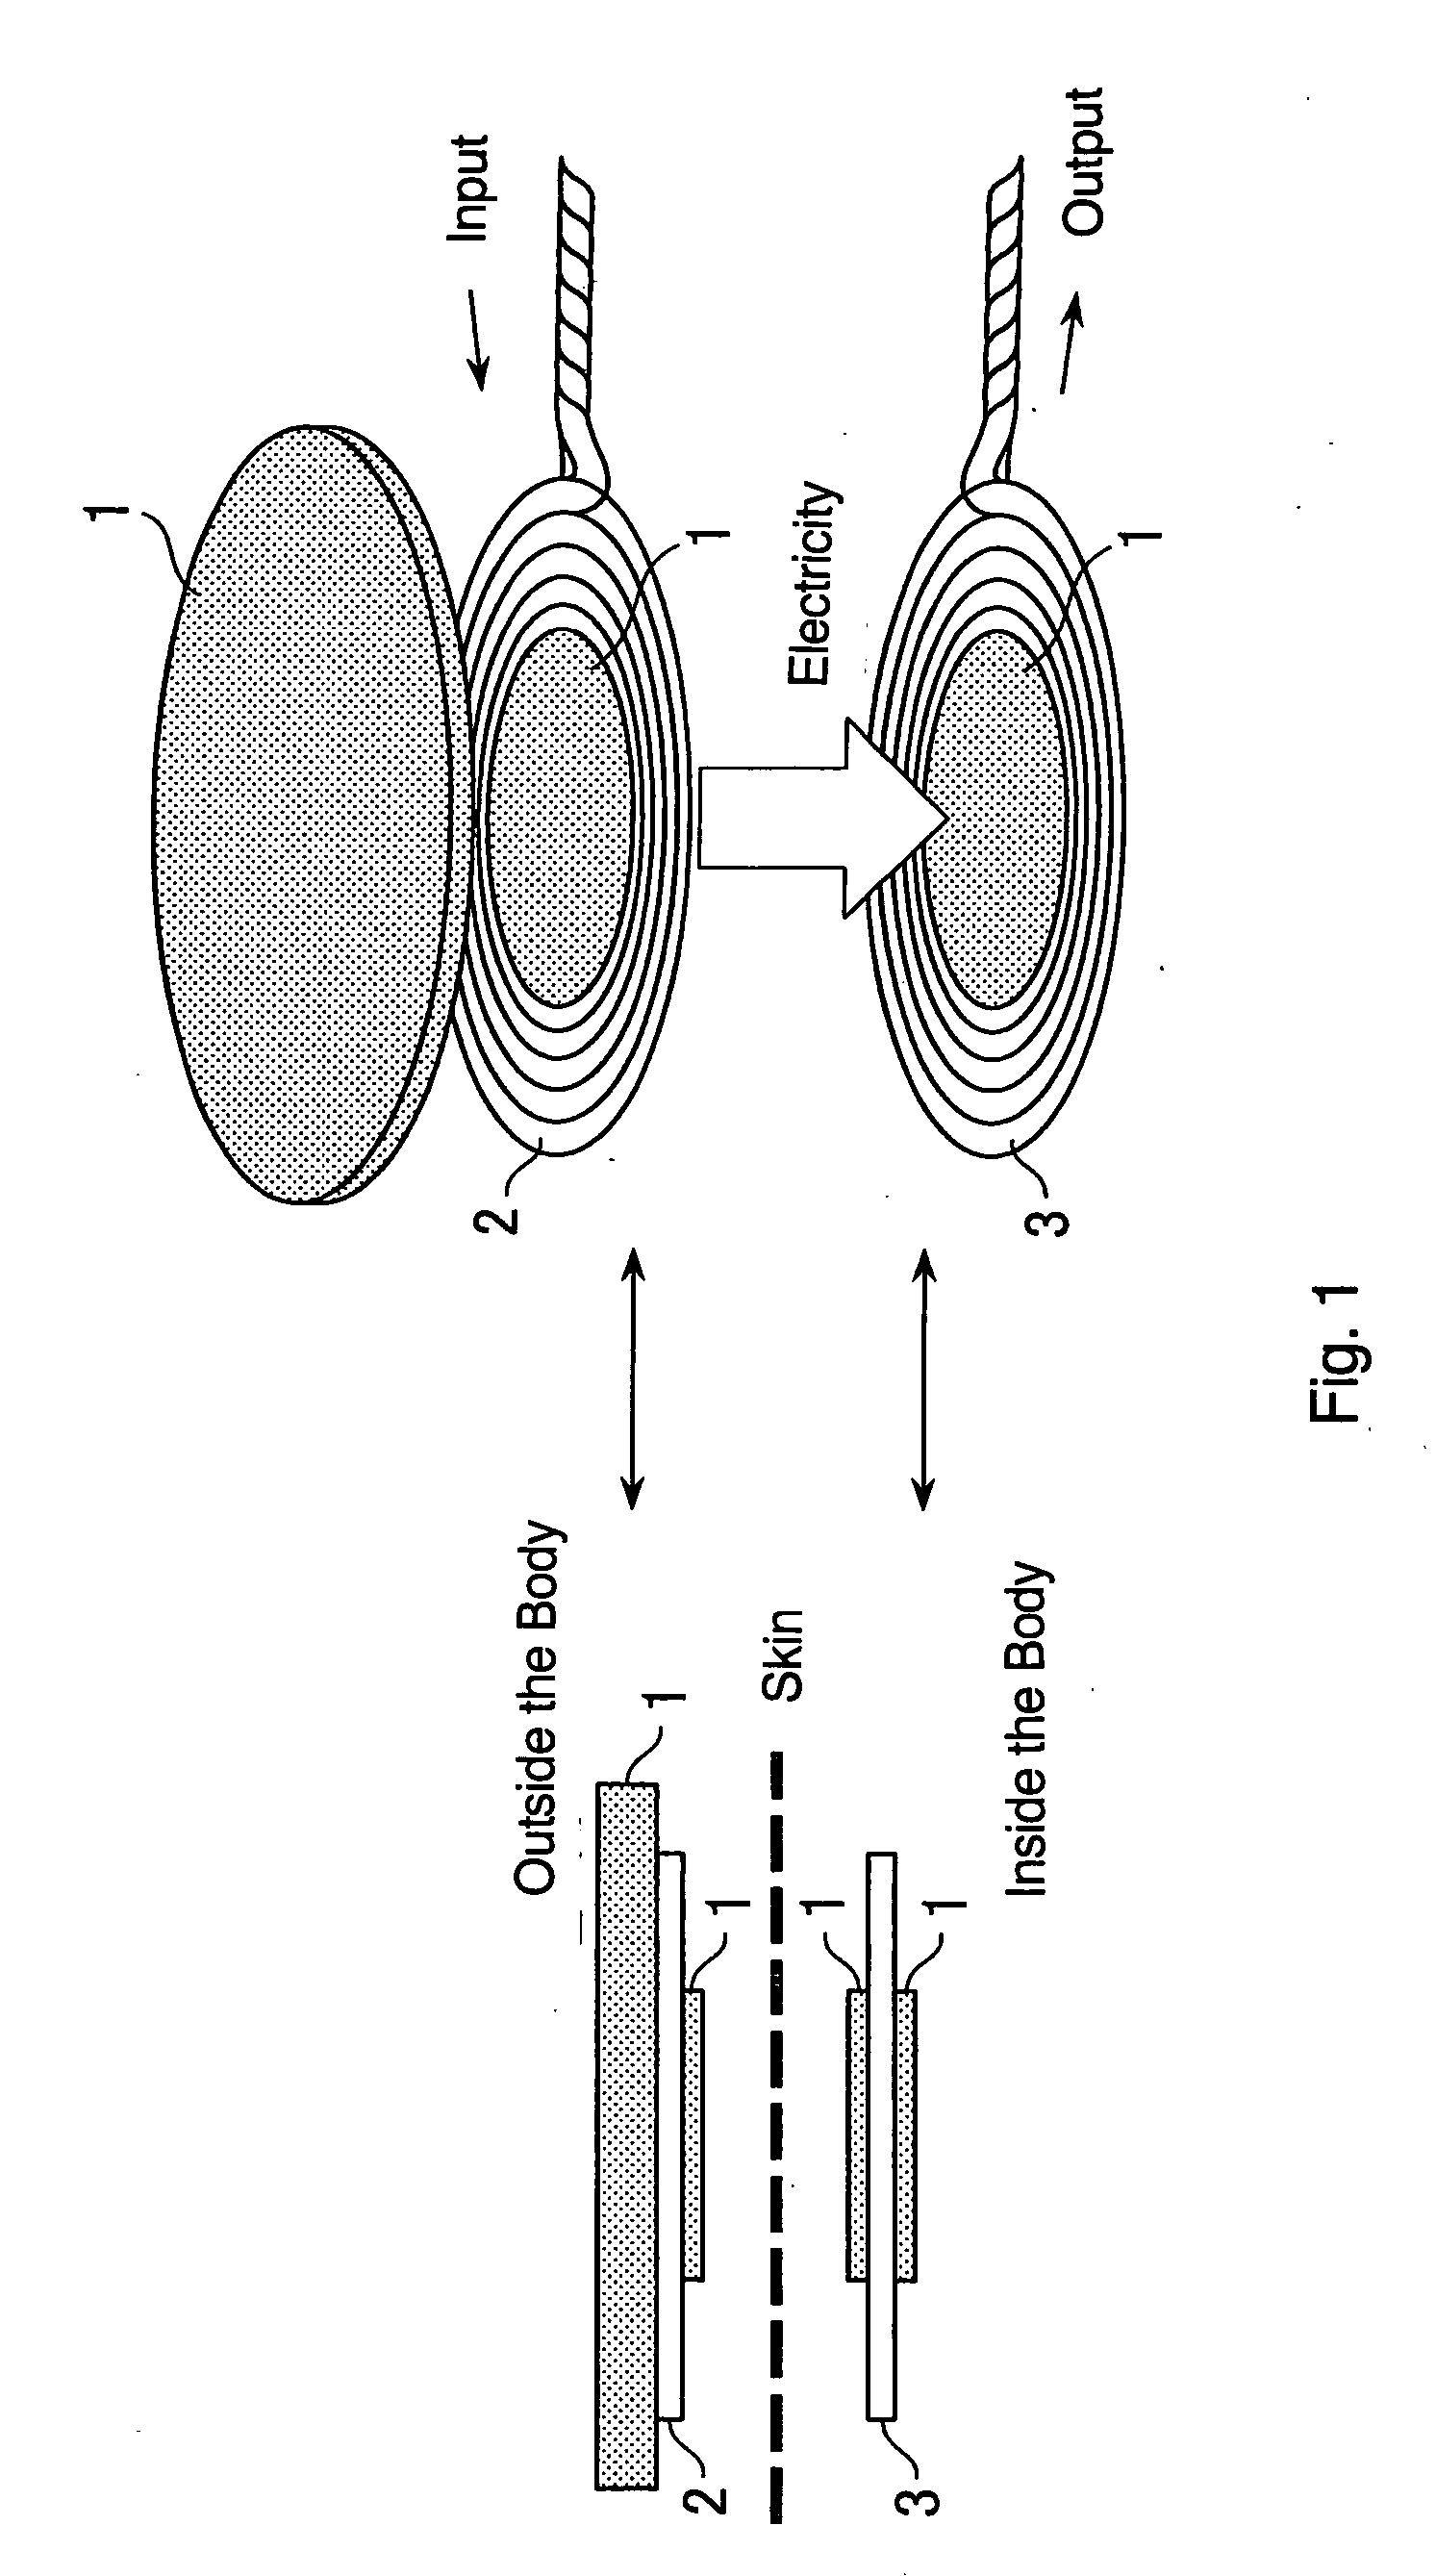 Device for electrically stimulating stomach